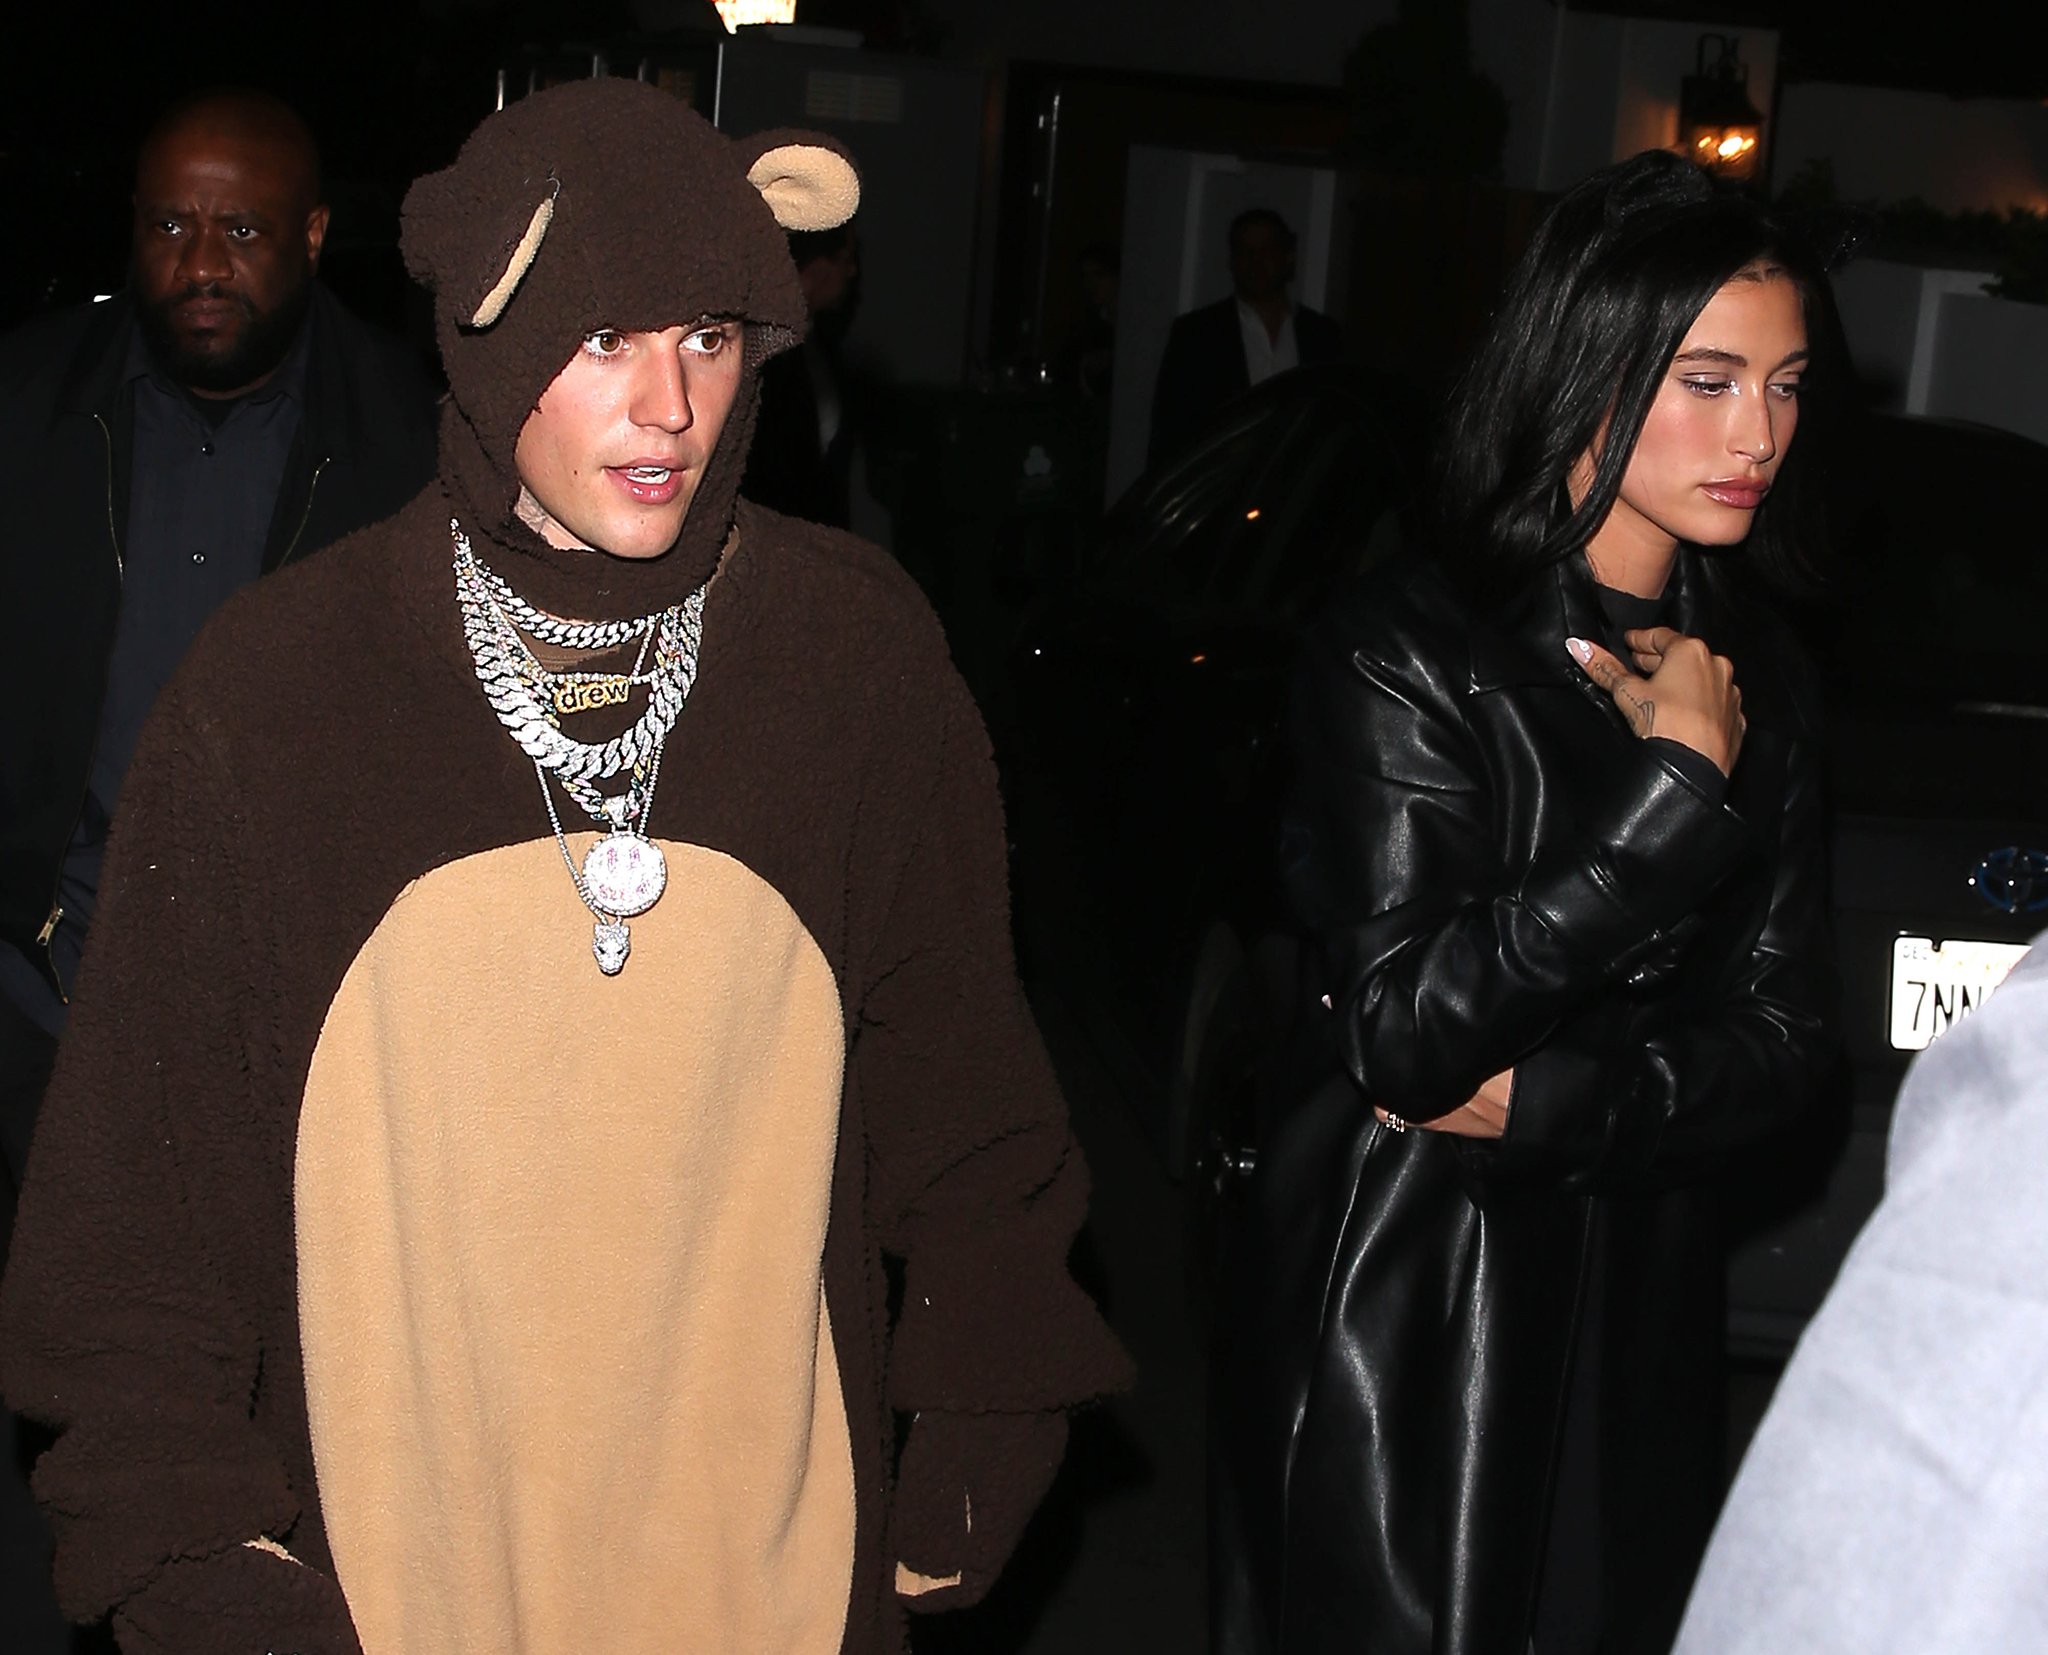 Justin Bieber and Hailey Bieber attend Vas Morgan and Michael Braun’s Halloween party in West Hollywood on October 31, 2021